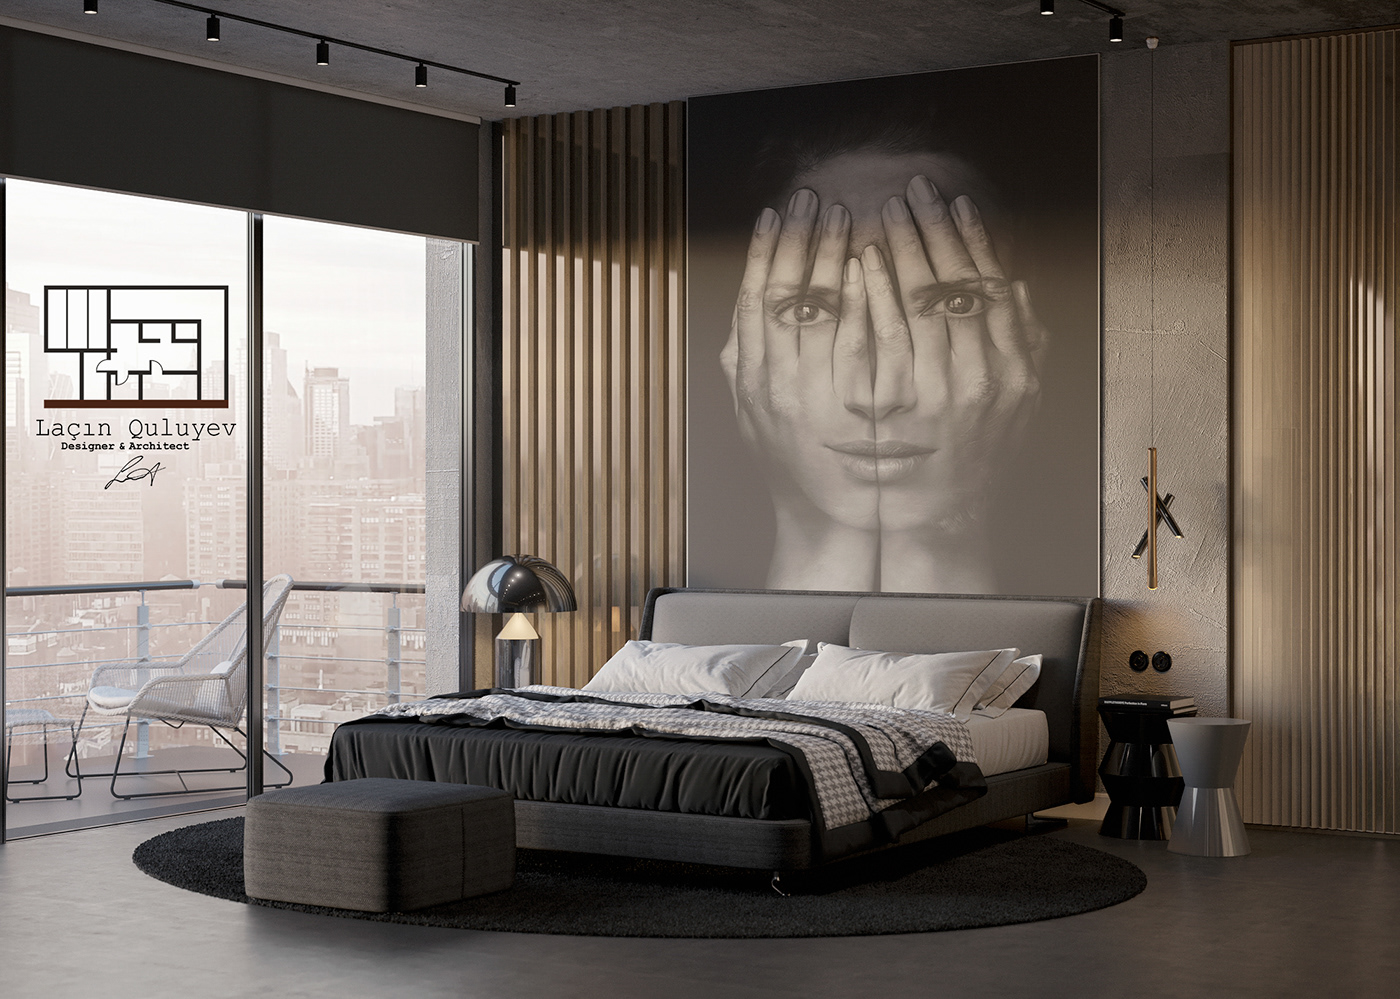 Cold Bedroom on Behance